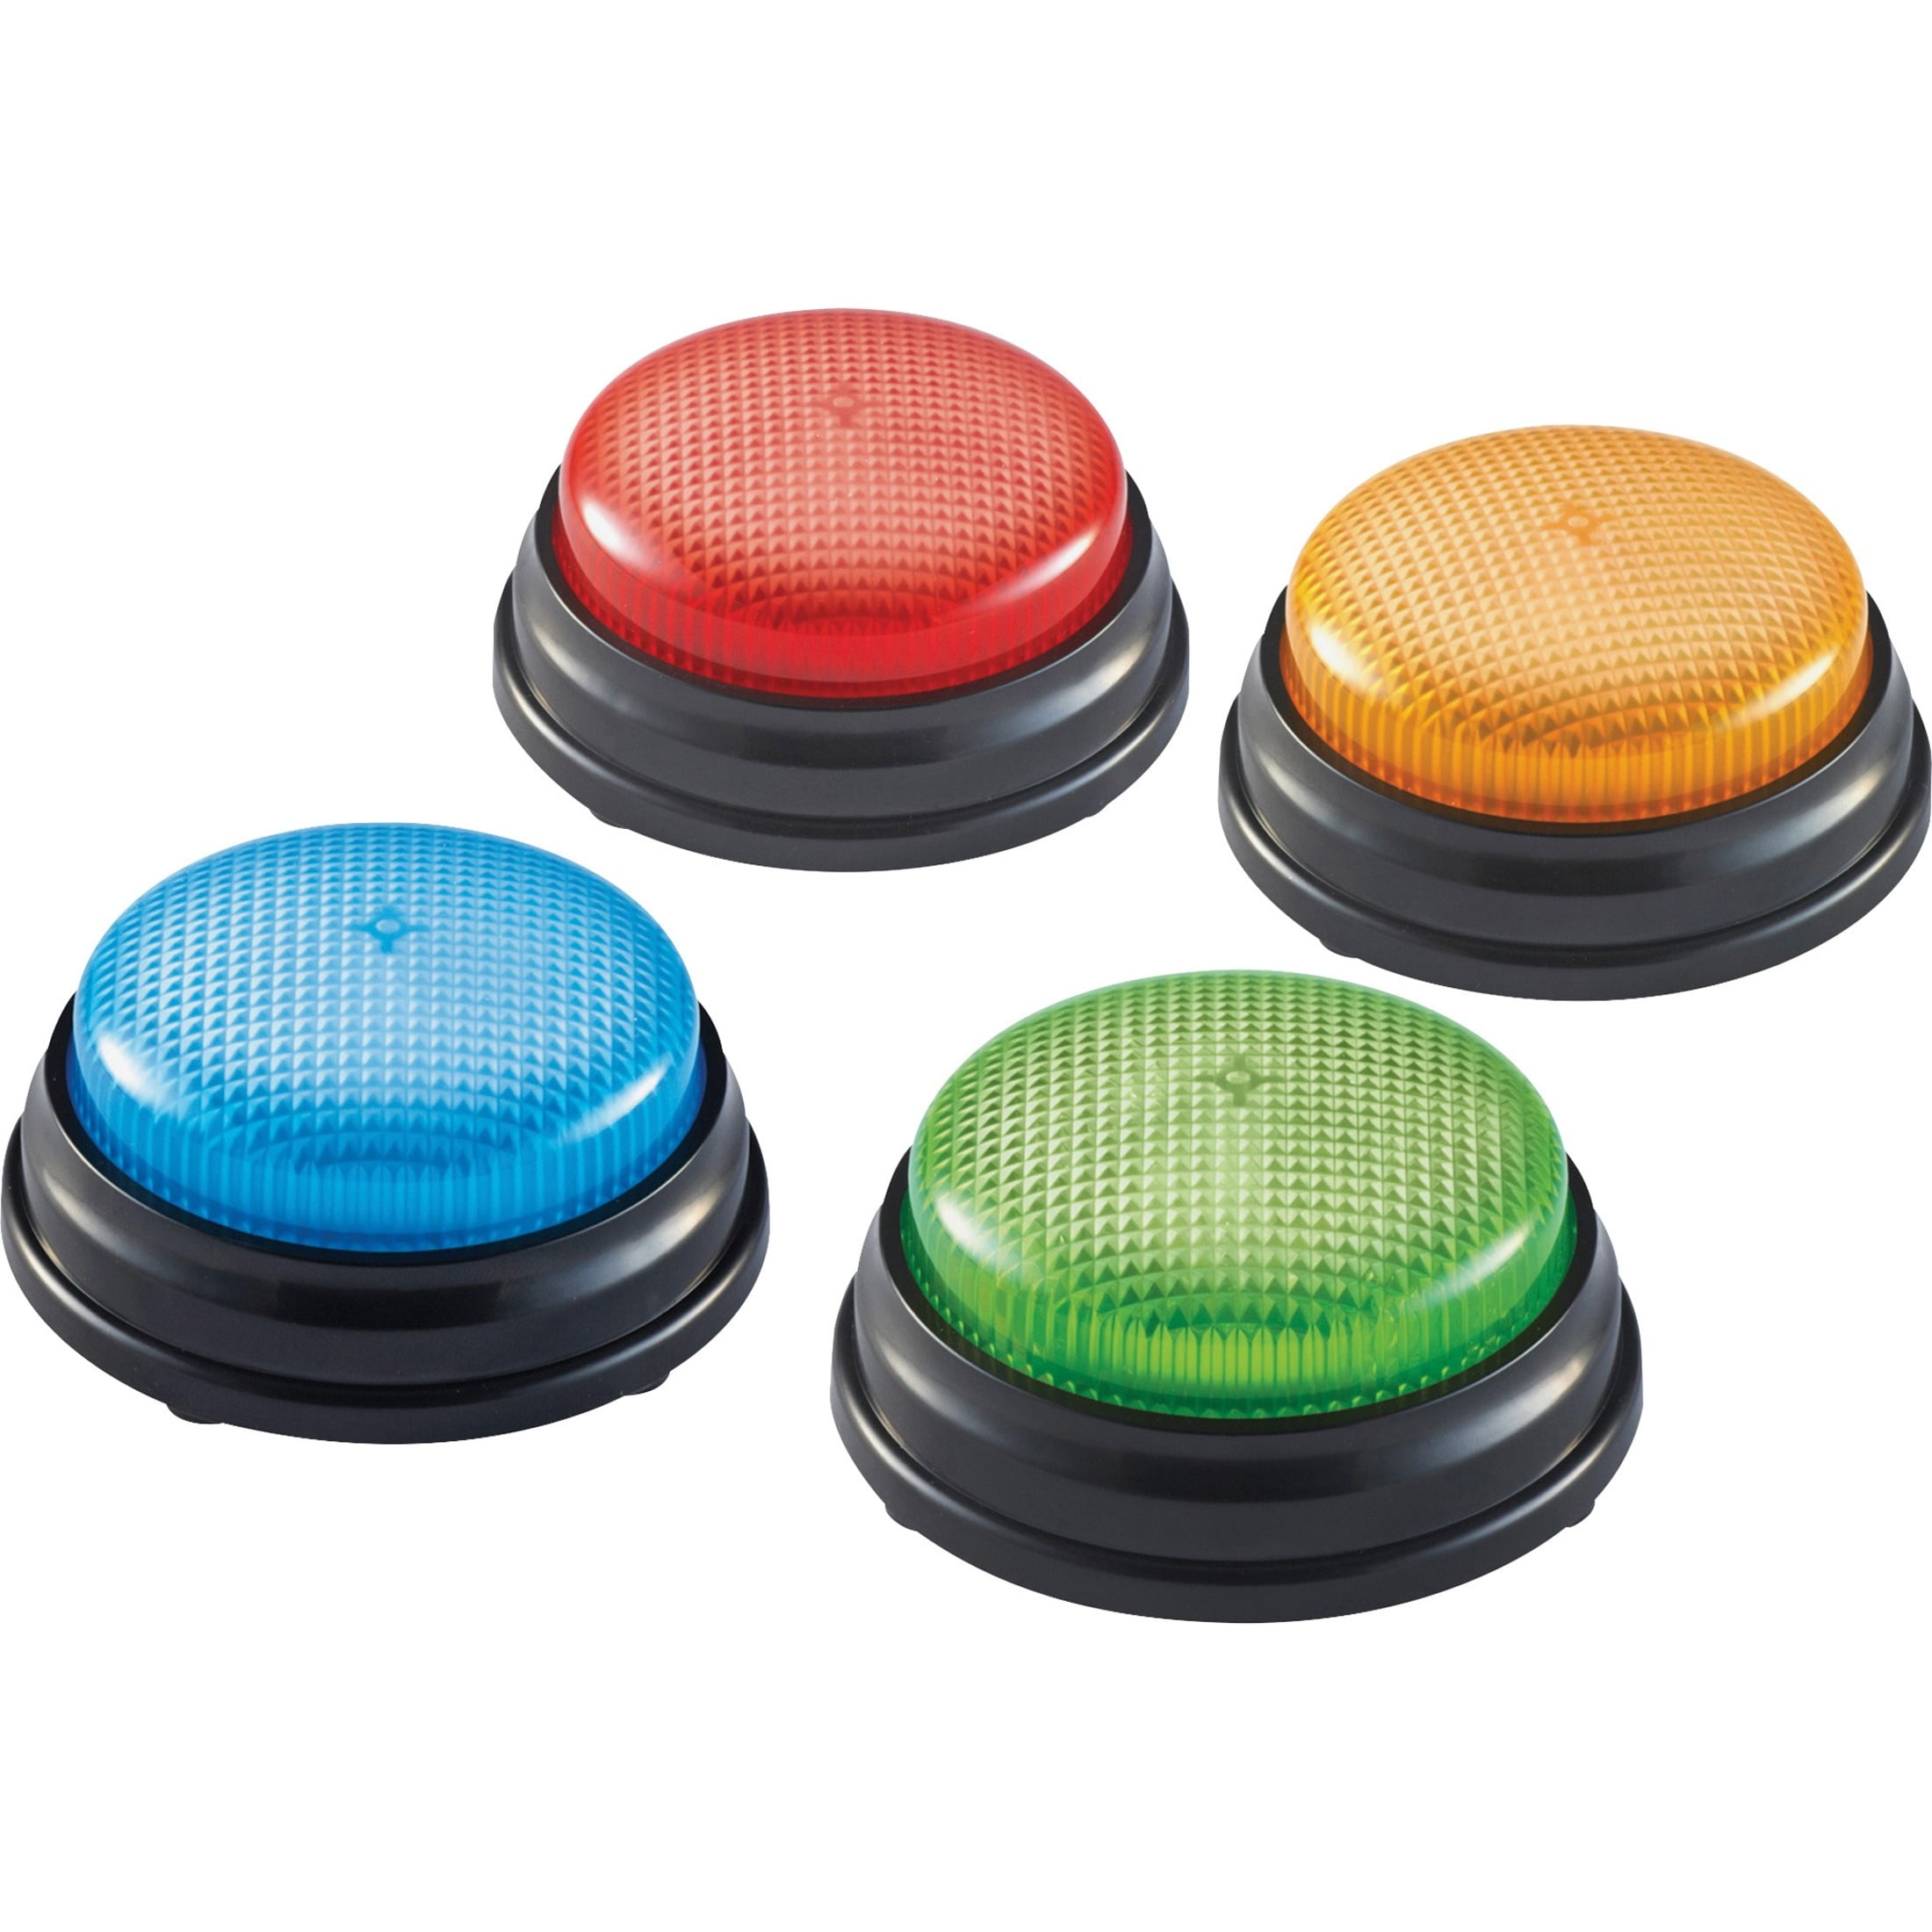 Recordable Talking Easy Carry Voice Recording Sound Button for Kids Interactive for sale online 